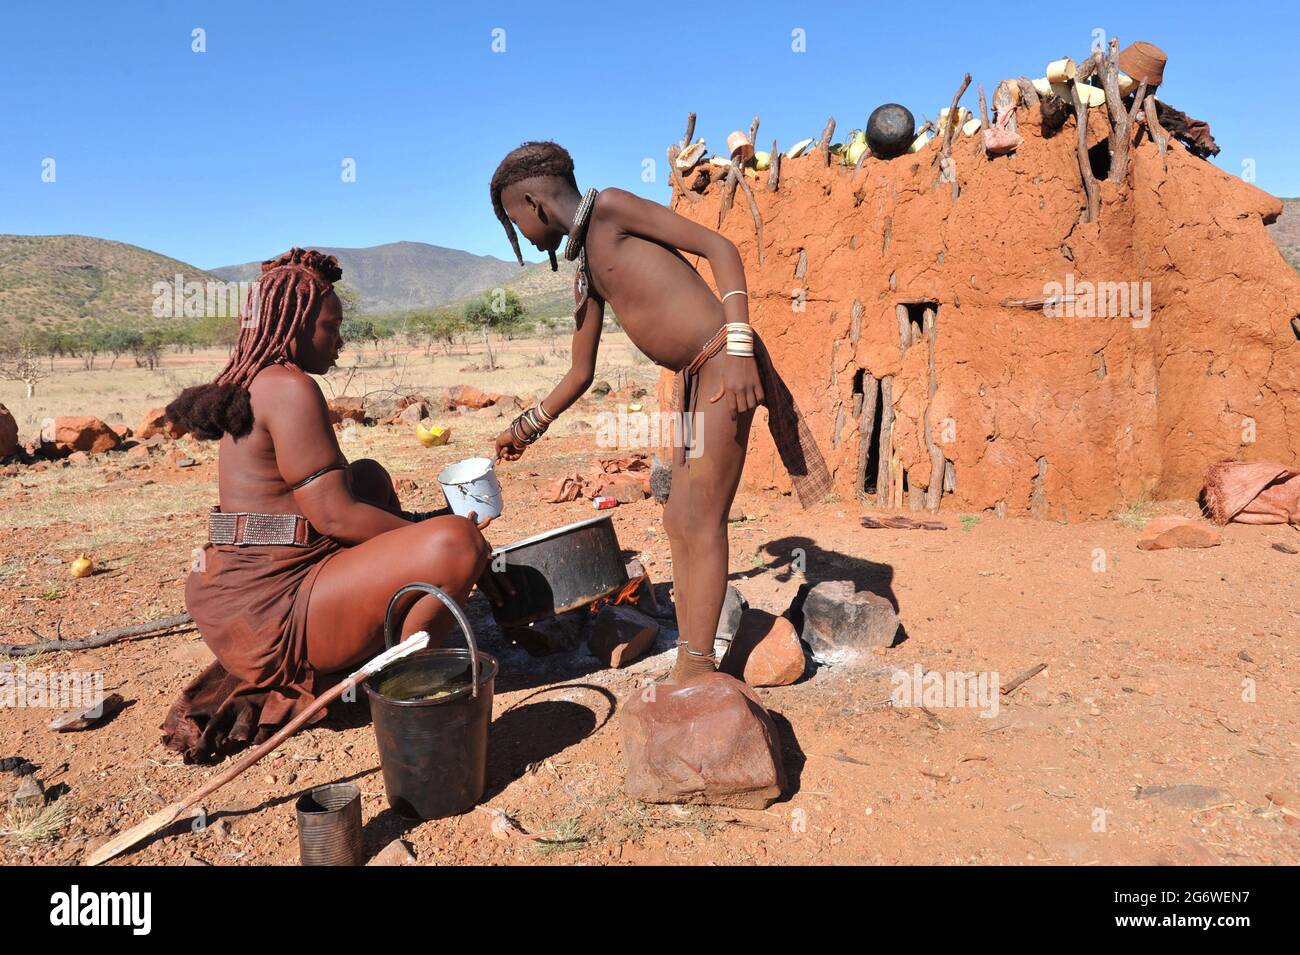 NAMIBIA. HIMBA WOMAN AND HER DAUGHTER MAKING SOME FOOD IN THEIR VILLAGE. THE HIMBA VILLAGE, OR KRAAL, IS COMPOSED OF FEW WOODEN AND CLAY HUTS WITH ONE Stock Photo